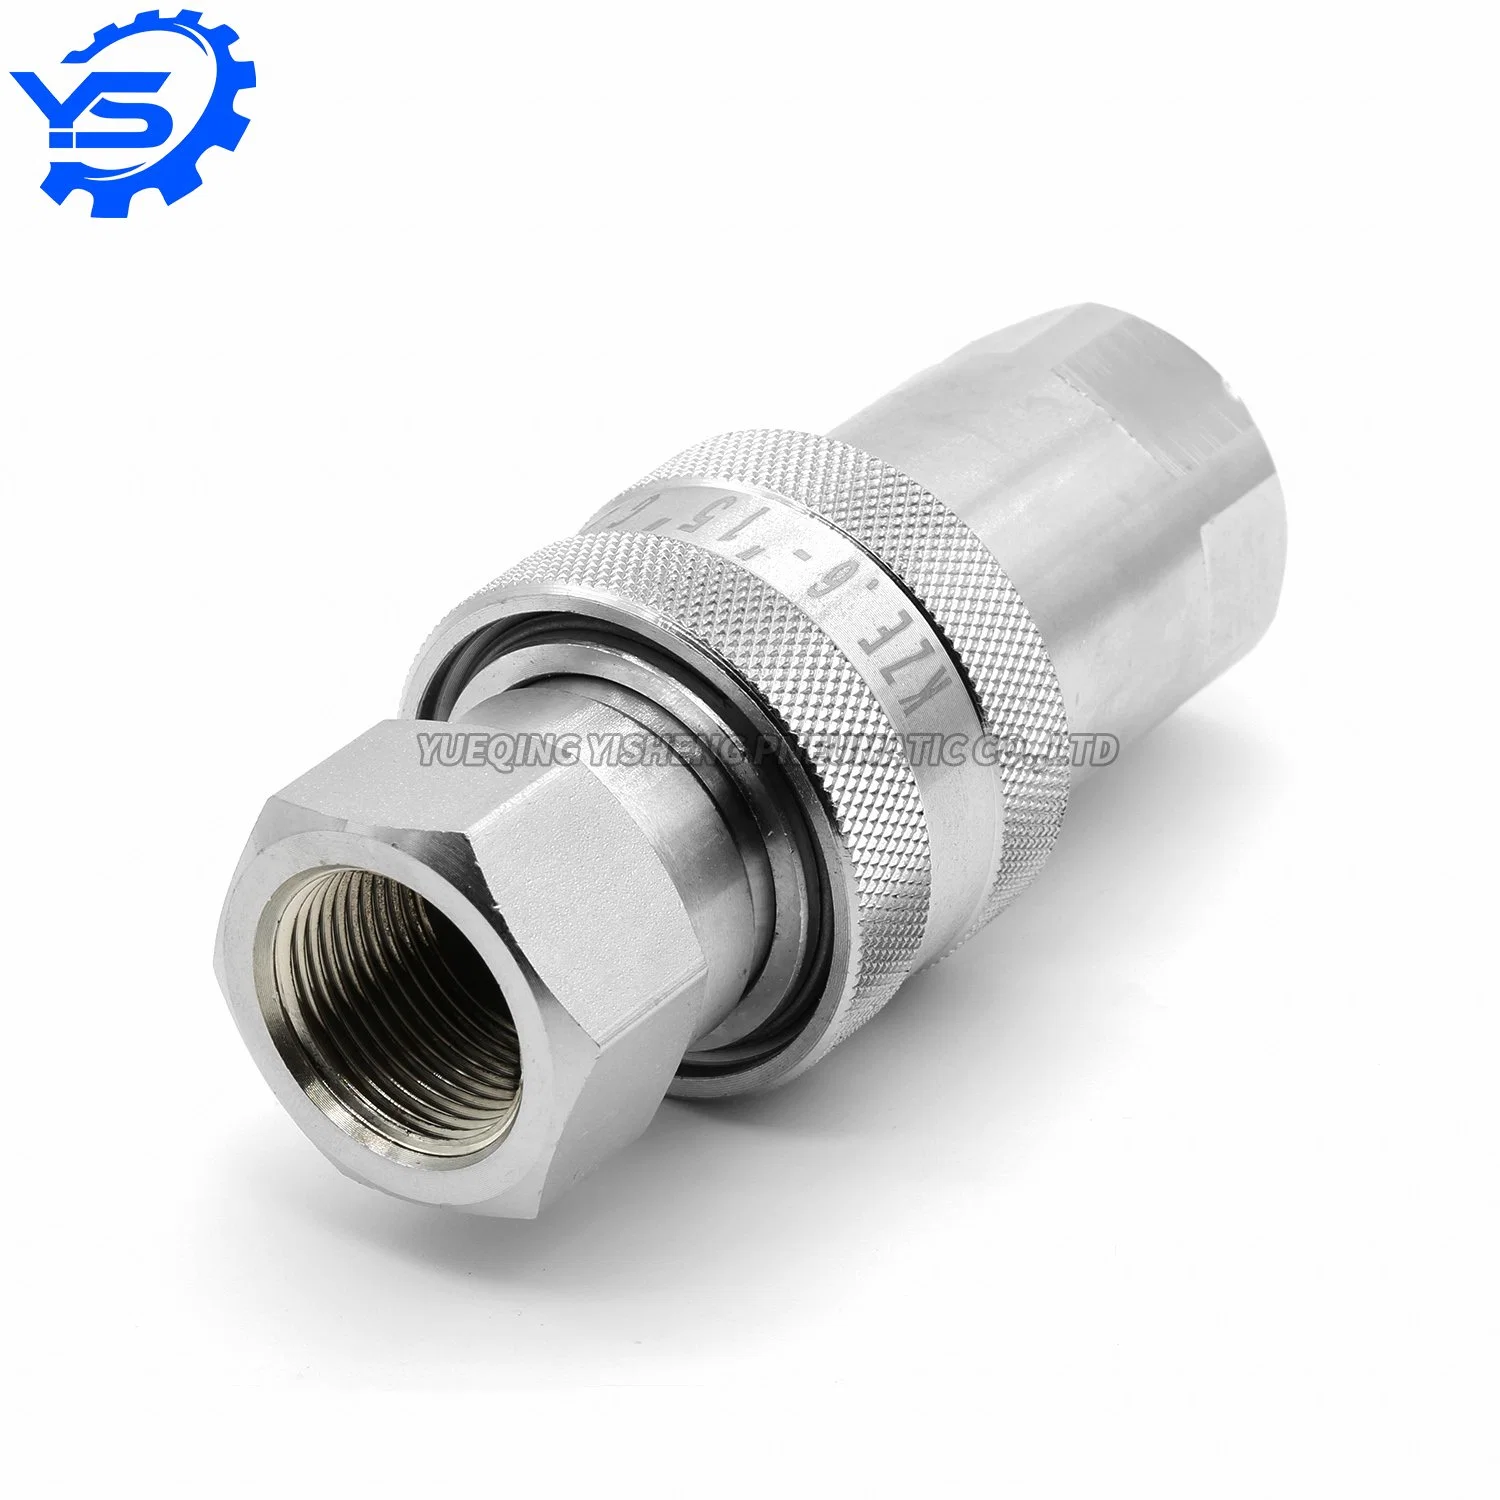 Kze Series Kze6-15 G3/4 Female Male Quick Connector Quick Connect Hose Fittings Fast Coupling Hydraulic Quick Coupler